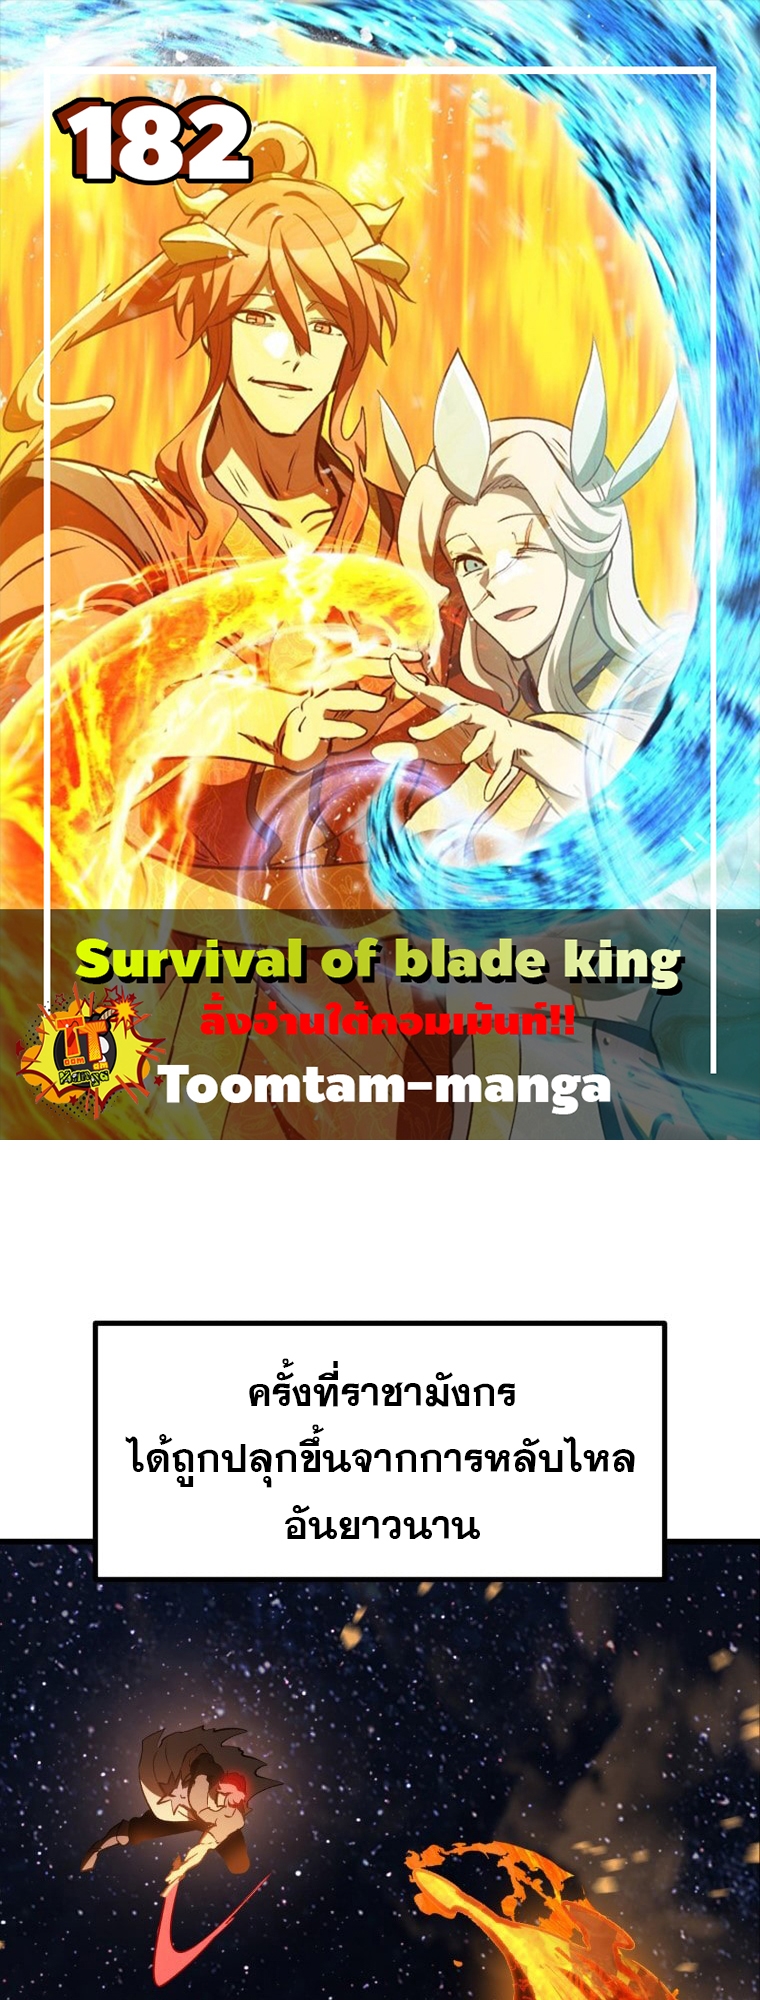 survival of blade king 182.01